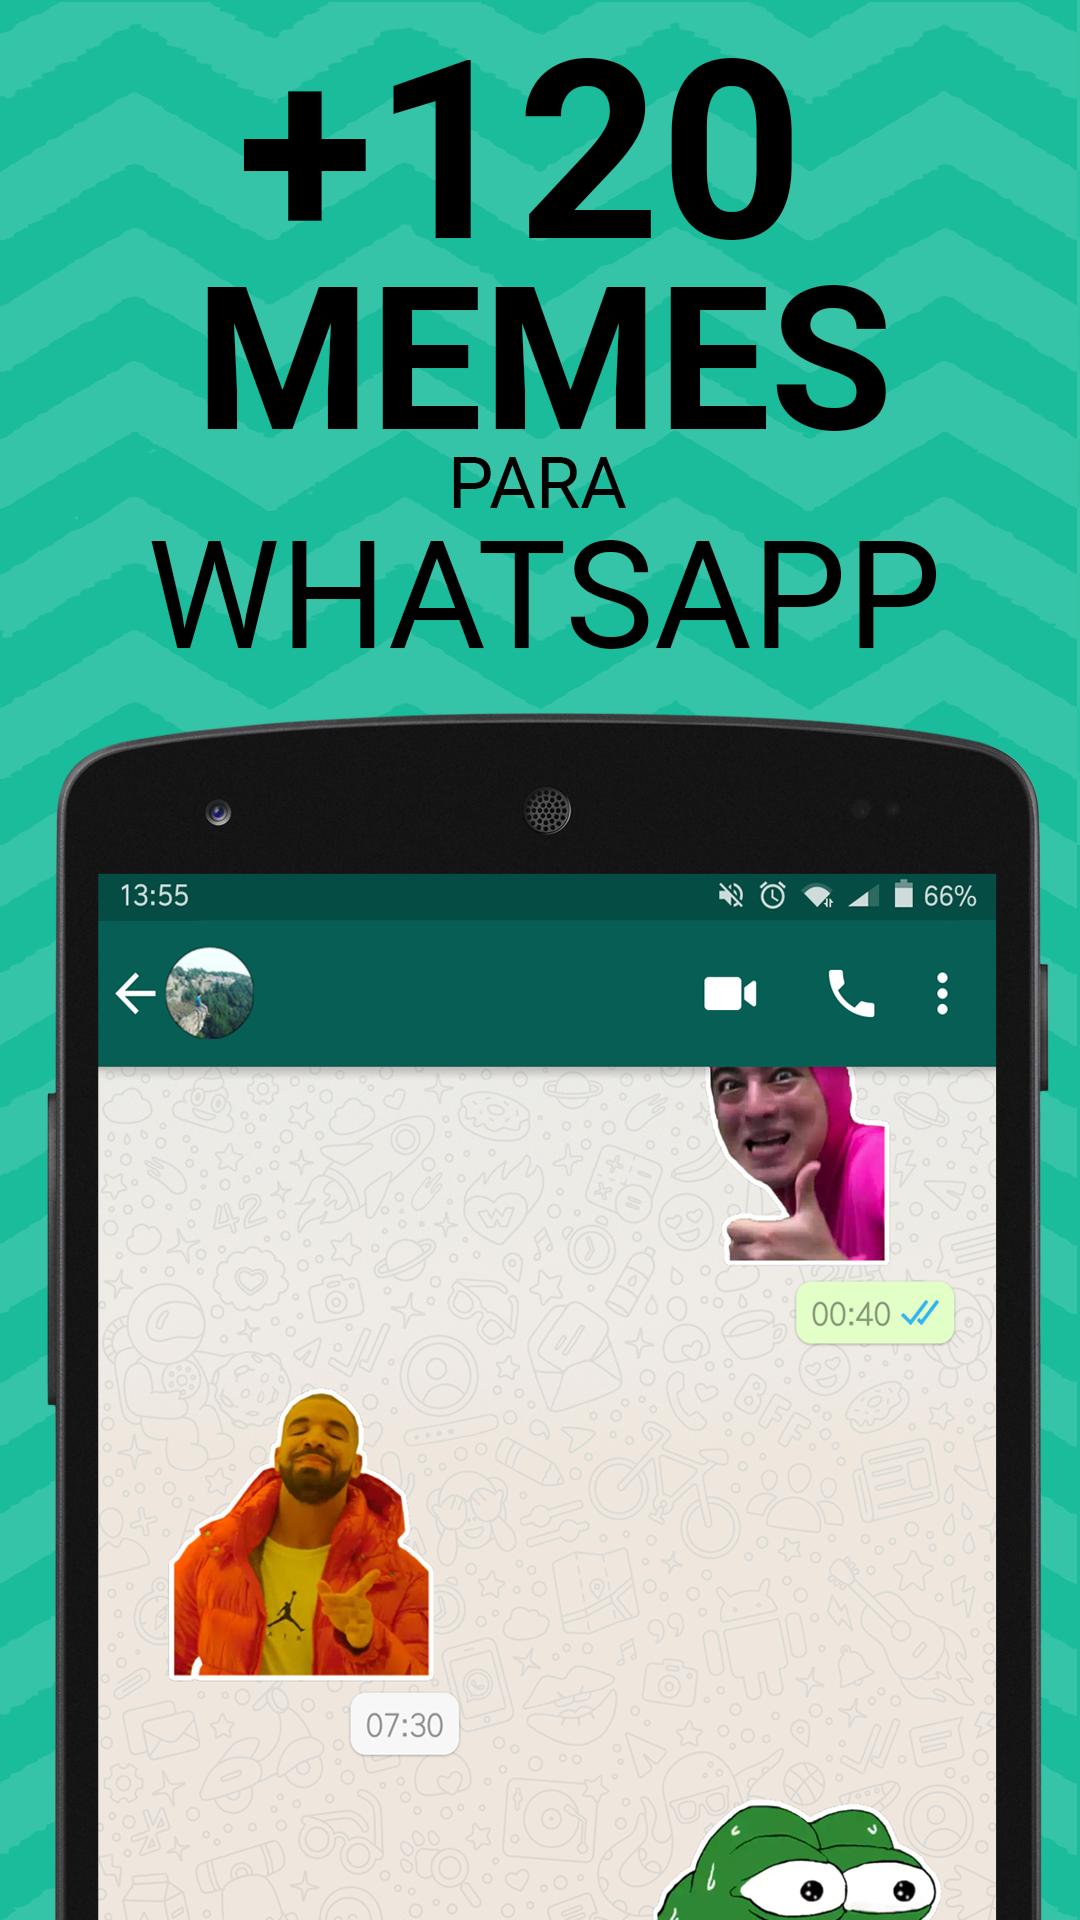 Stickers de Memes para WhatsApp for Android - APK Download